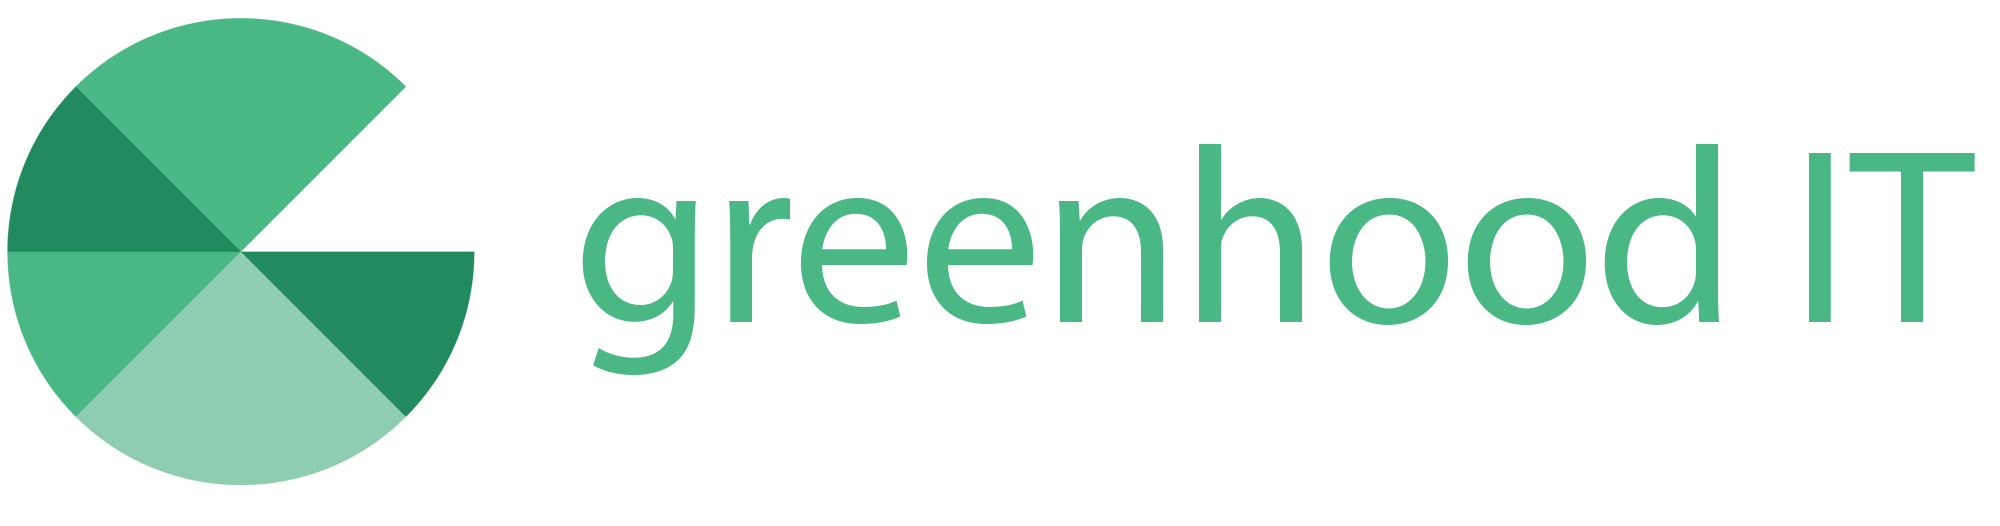 Greenhood IT – MANAGED IT SERVICES Logo